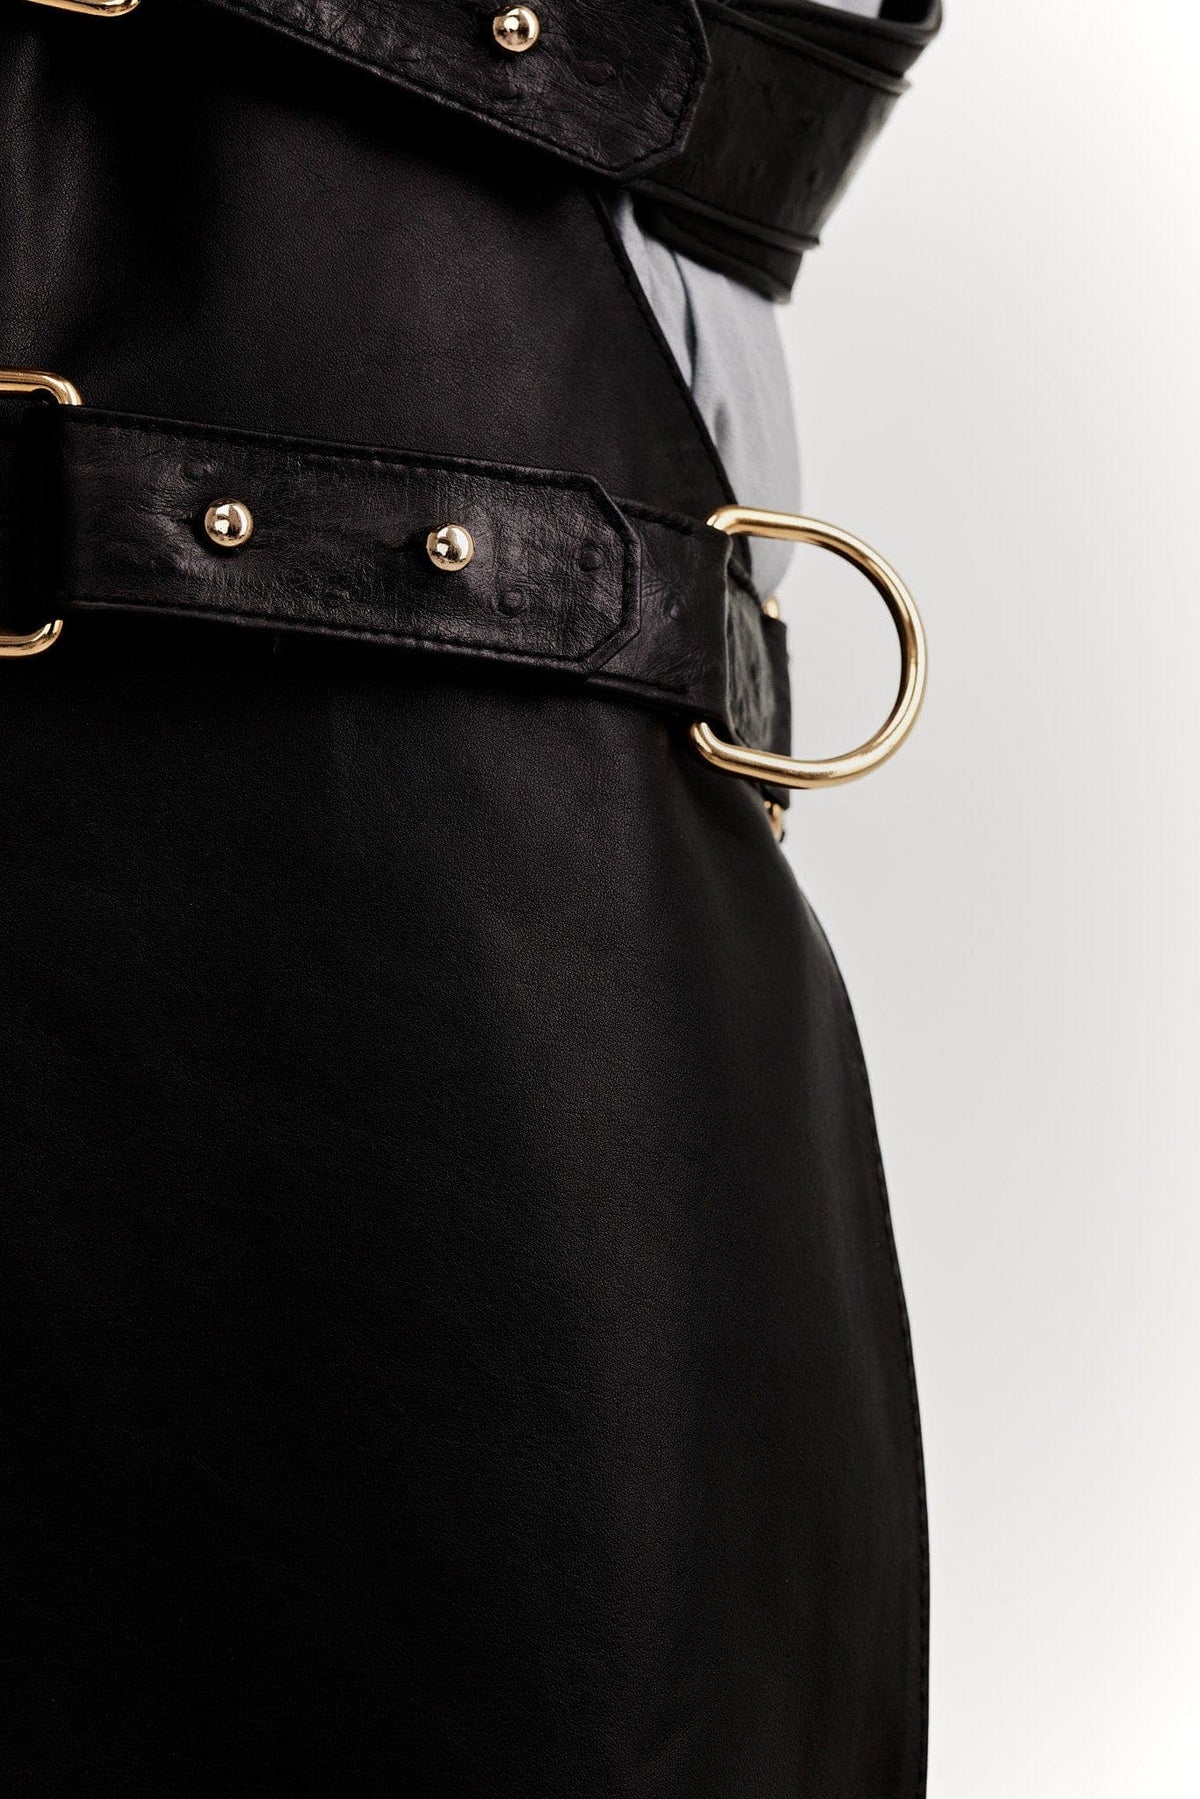 Eskandur men&#39;s black leather luxury premium apron zoom on the side with D-ring and gold collar buttons